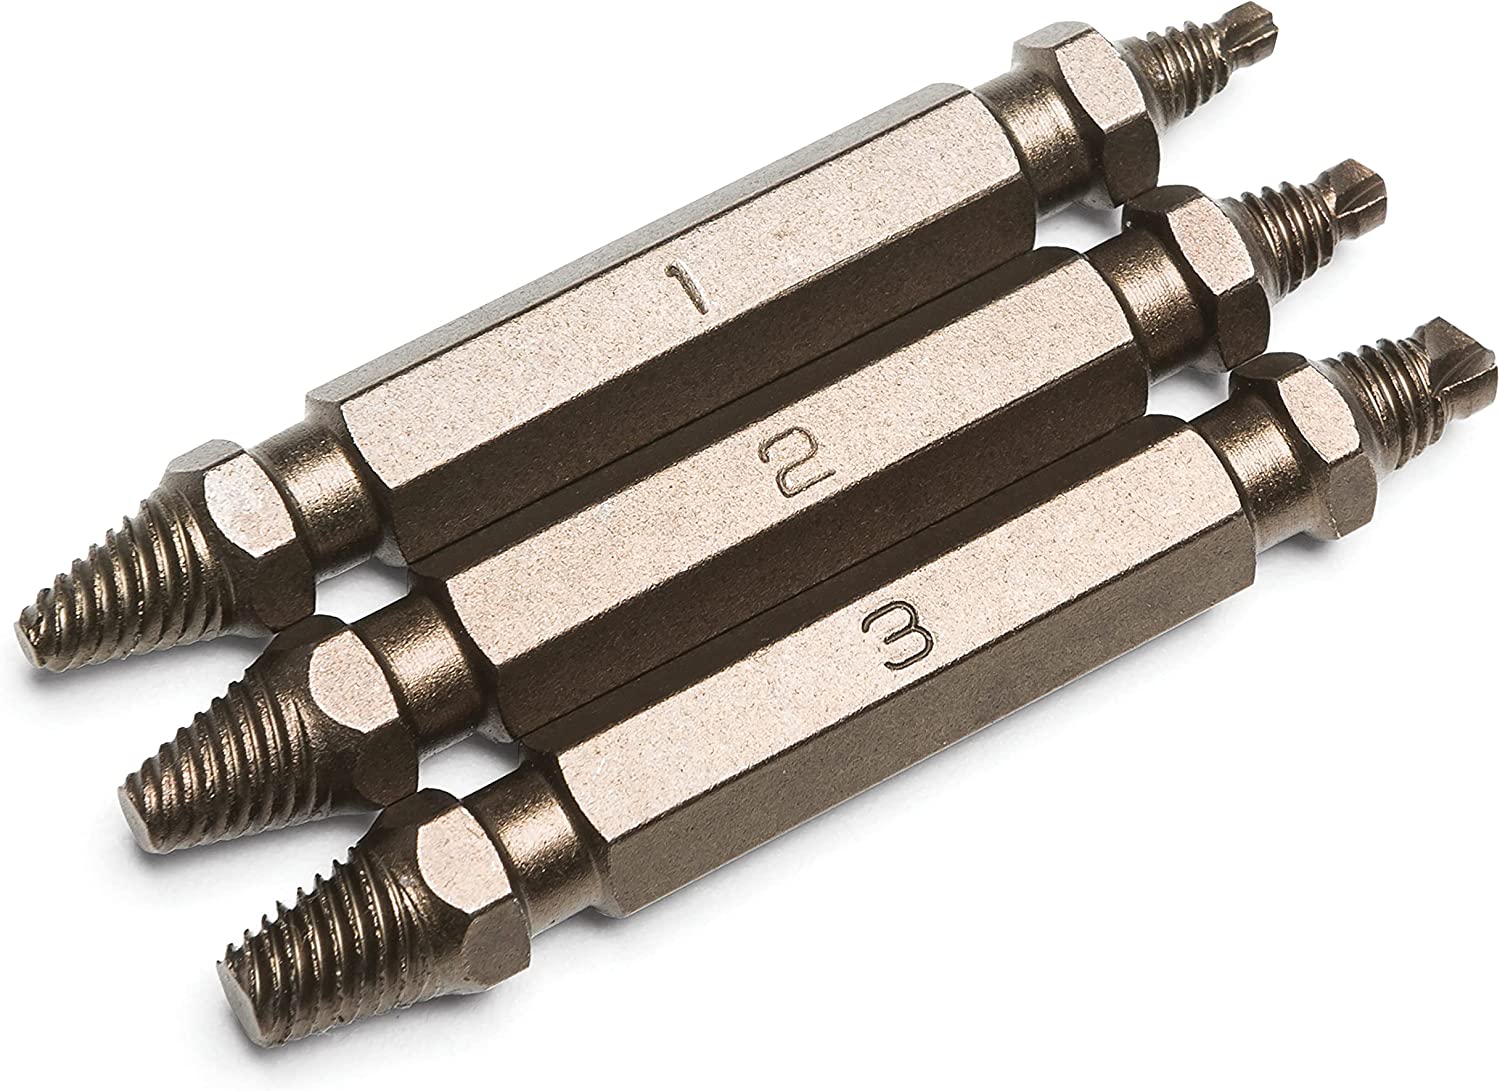 3 Pc. Damaged Screw Remover Set by TITAN